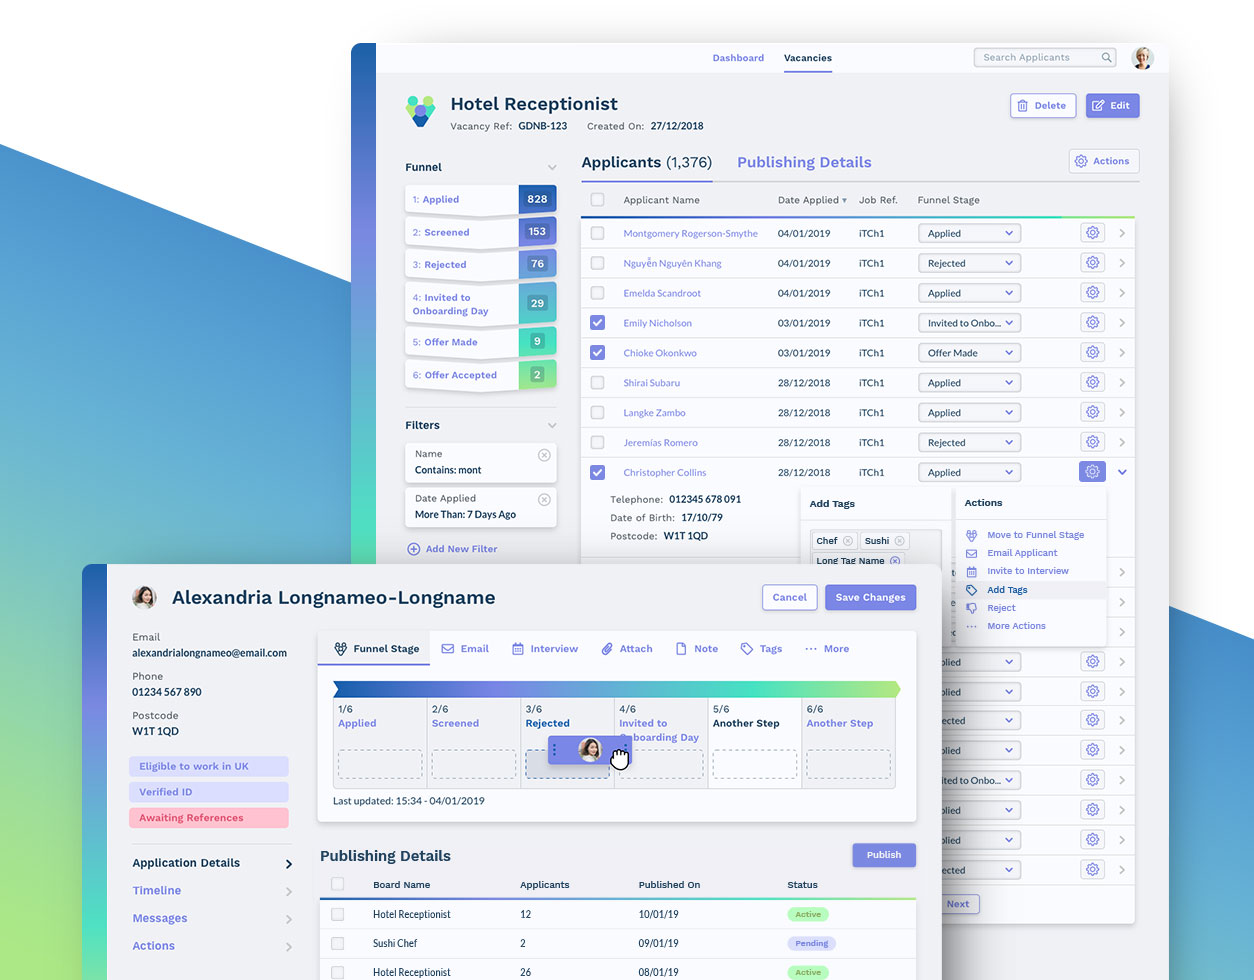 Screenshots from a new and improved HR applicant tracking system that reaps big time savings through simple design.